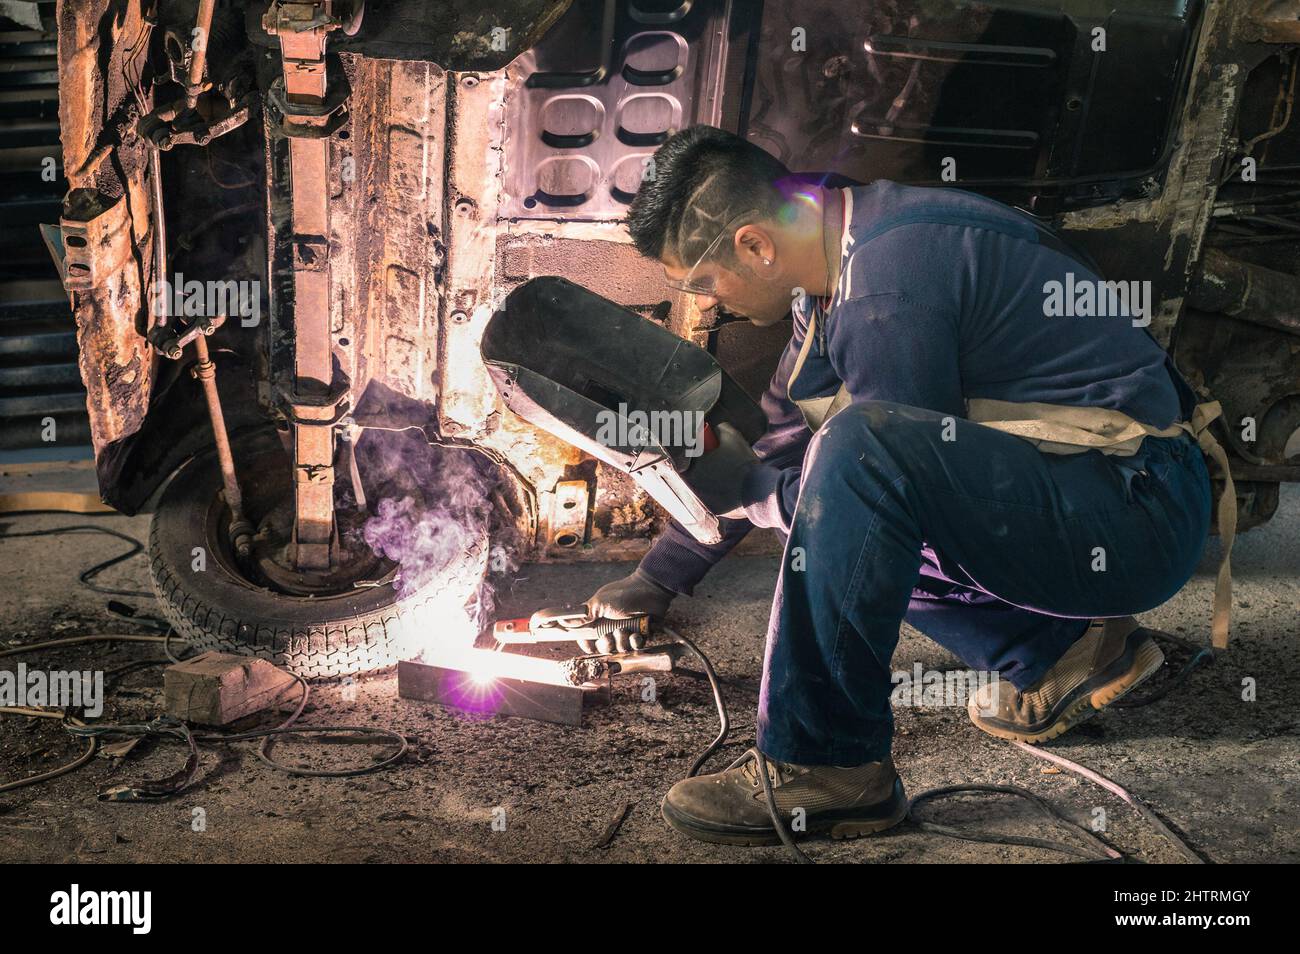 Young man mechanic worker repairing old vintage car body in messy garage - Safety at work and protection wear - Guy with cool hair cut at vehicle reno Stock Photo